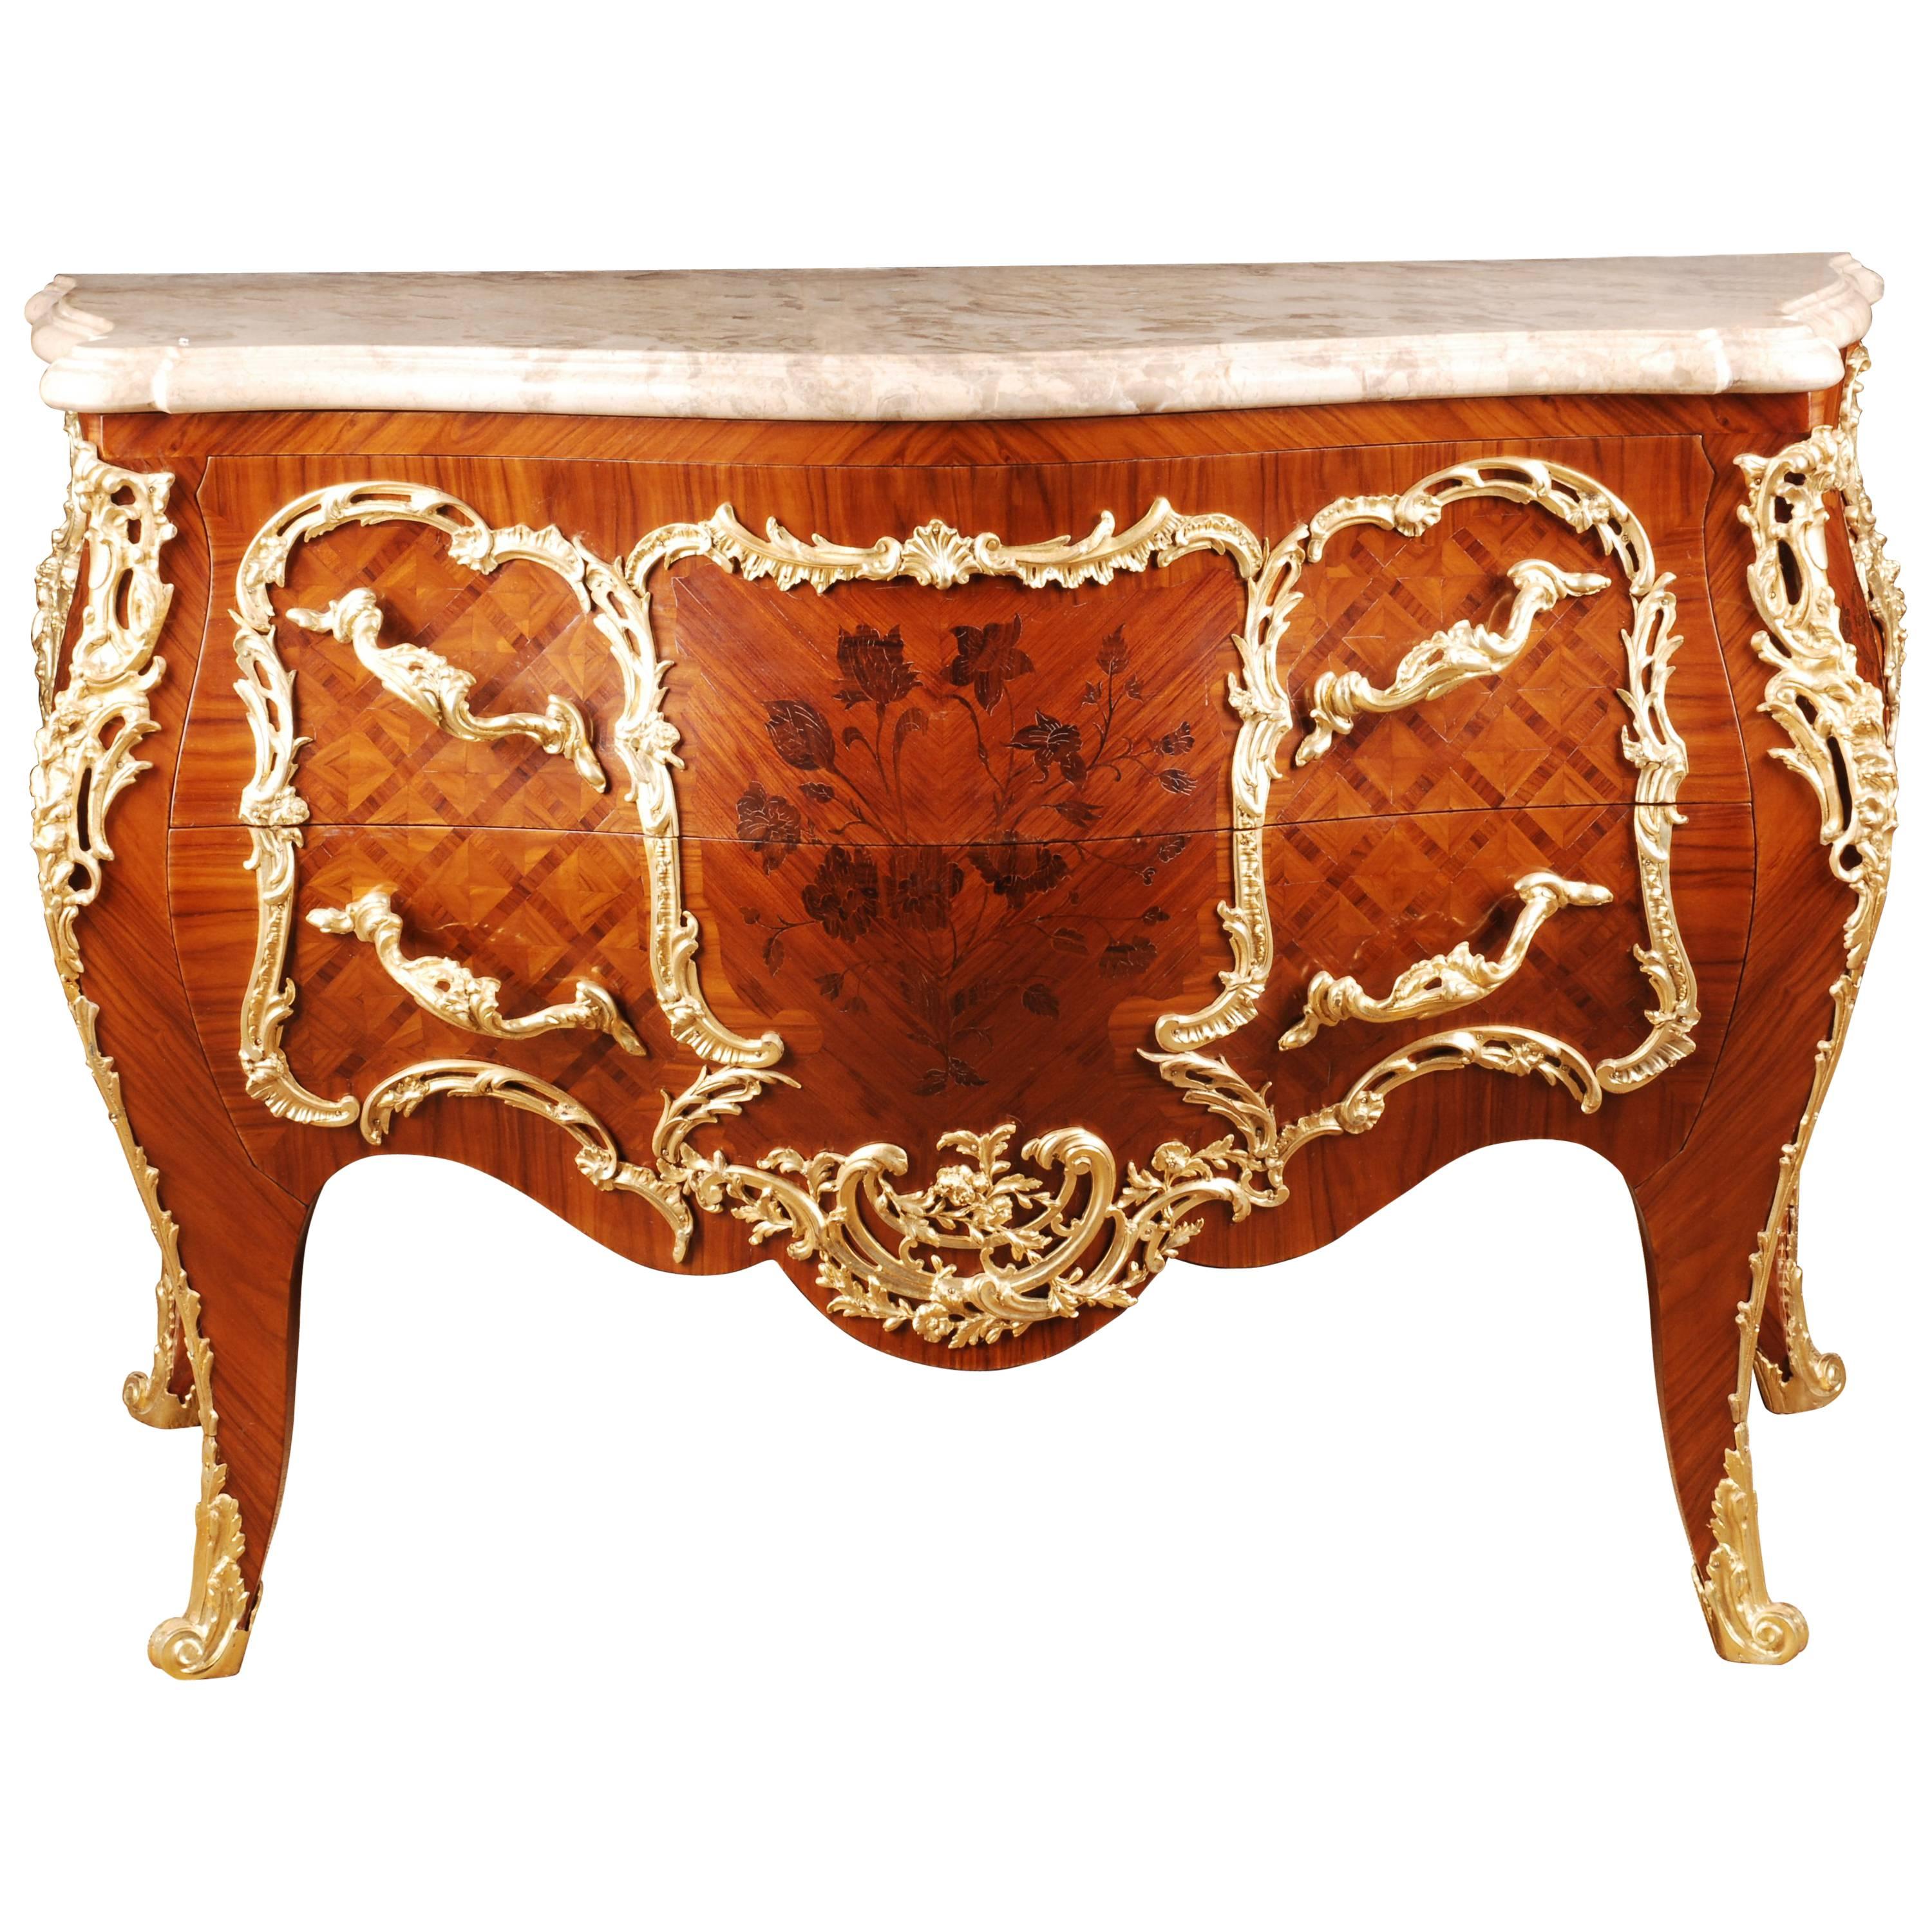 Castle Quality French Commode in Louis XV Style